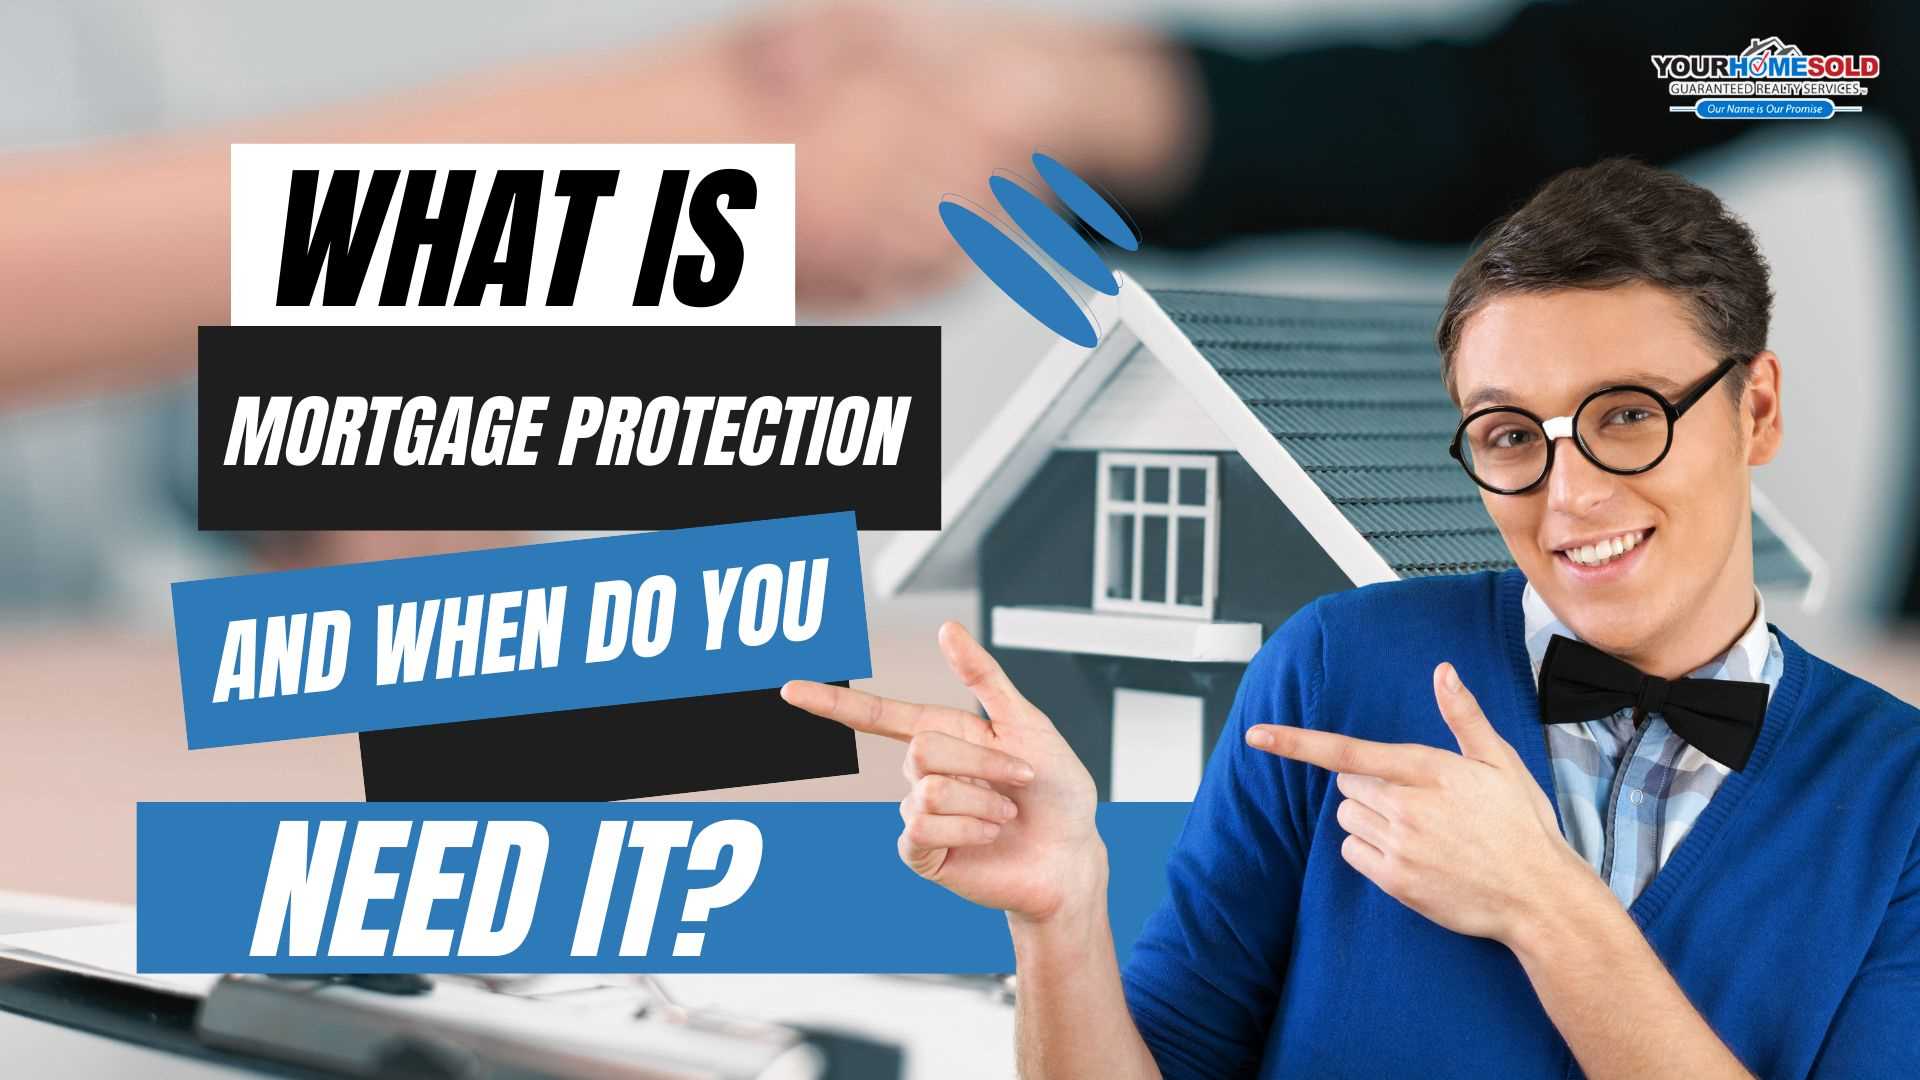 WHAT IS MORTGAGE PROTECTION AND WHEN DO YOU NEED IT?